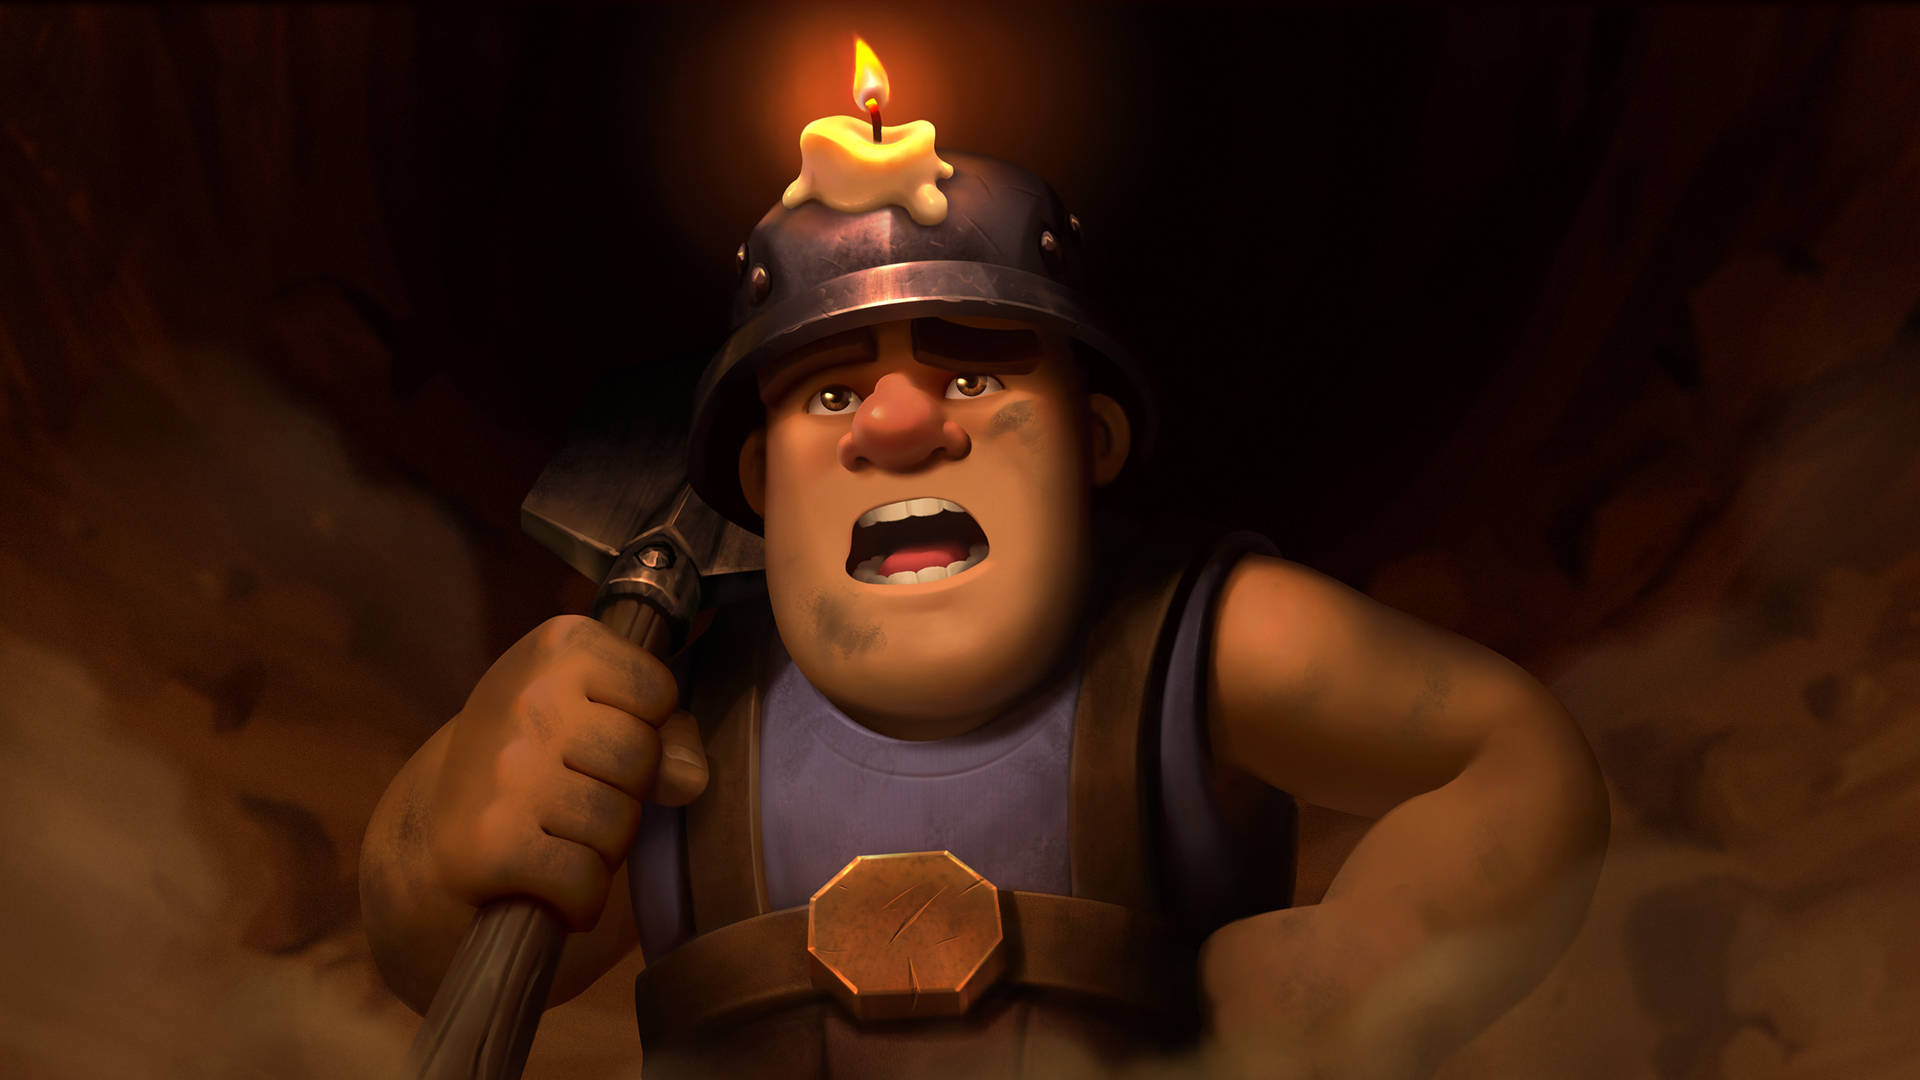 Miner From The Clash Royale Phone Game In A Cave Wallpaper